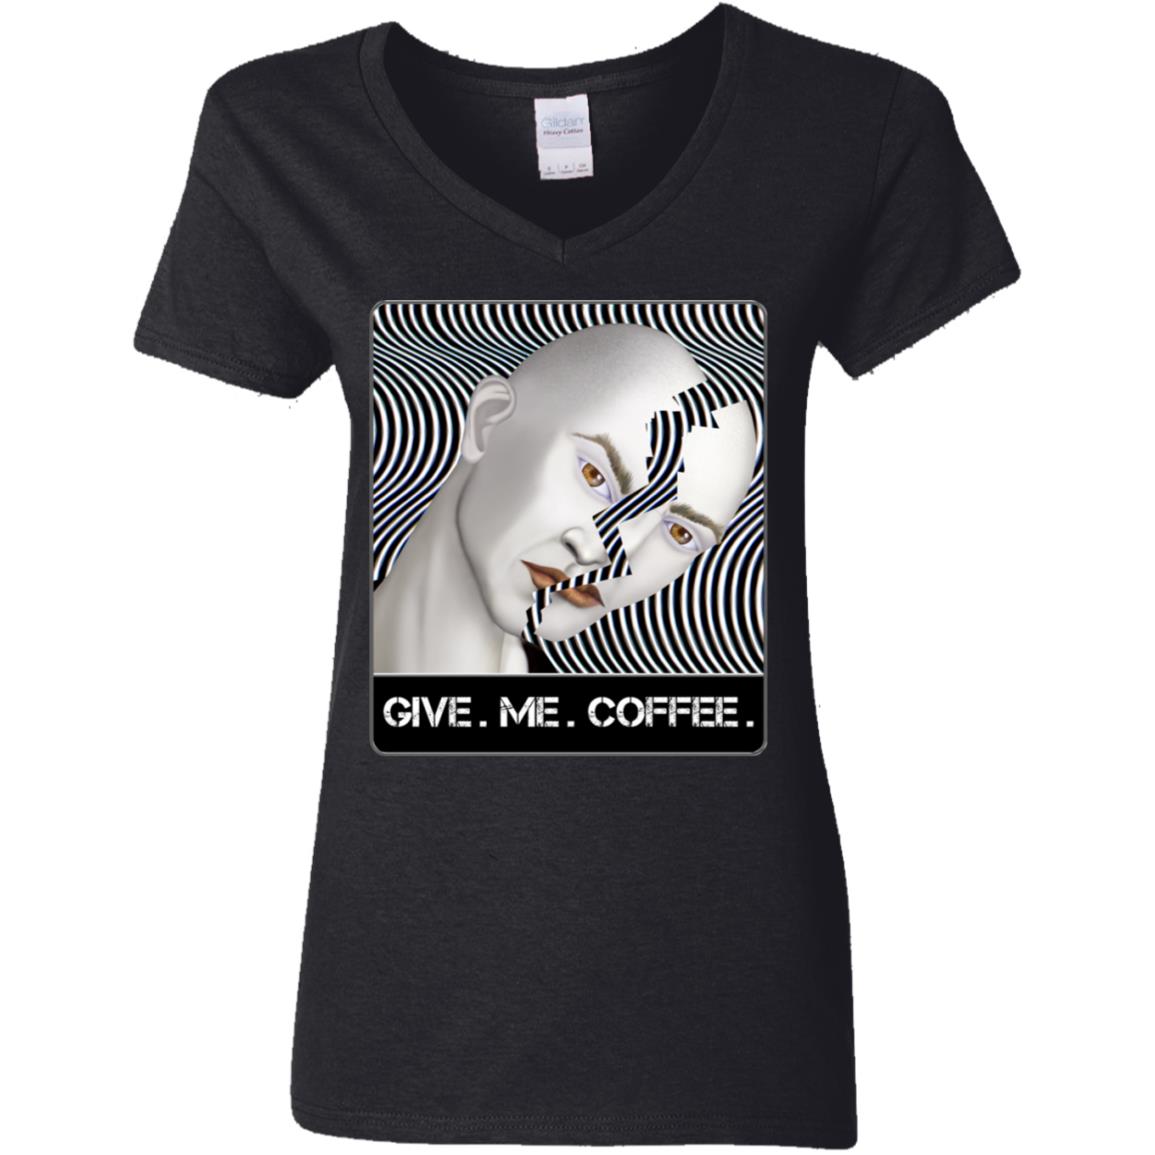 GIVE. ME. COFFEE. - Women's V-Neck T Shirt